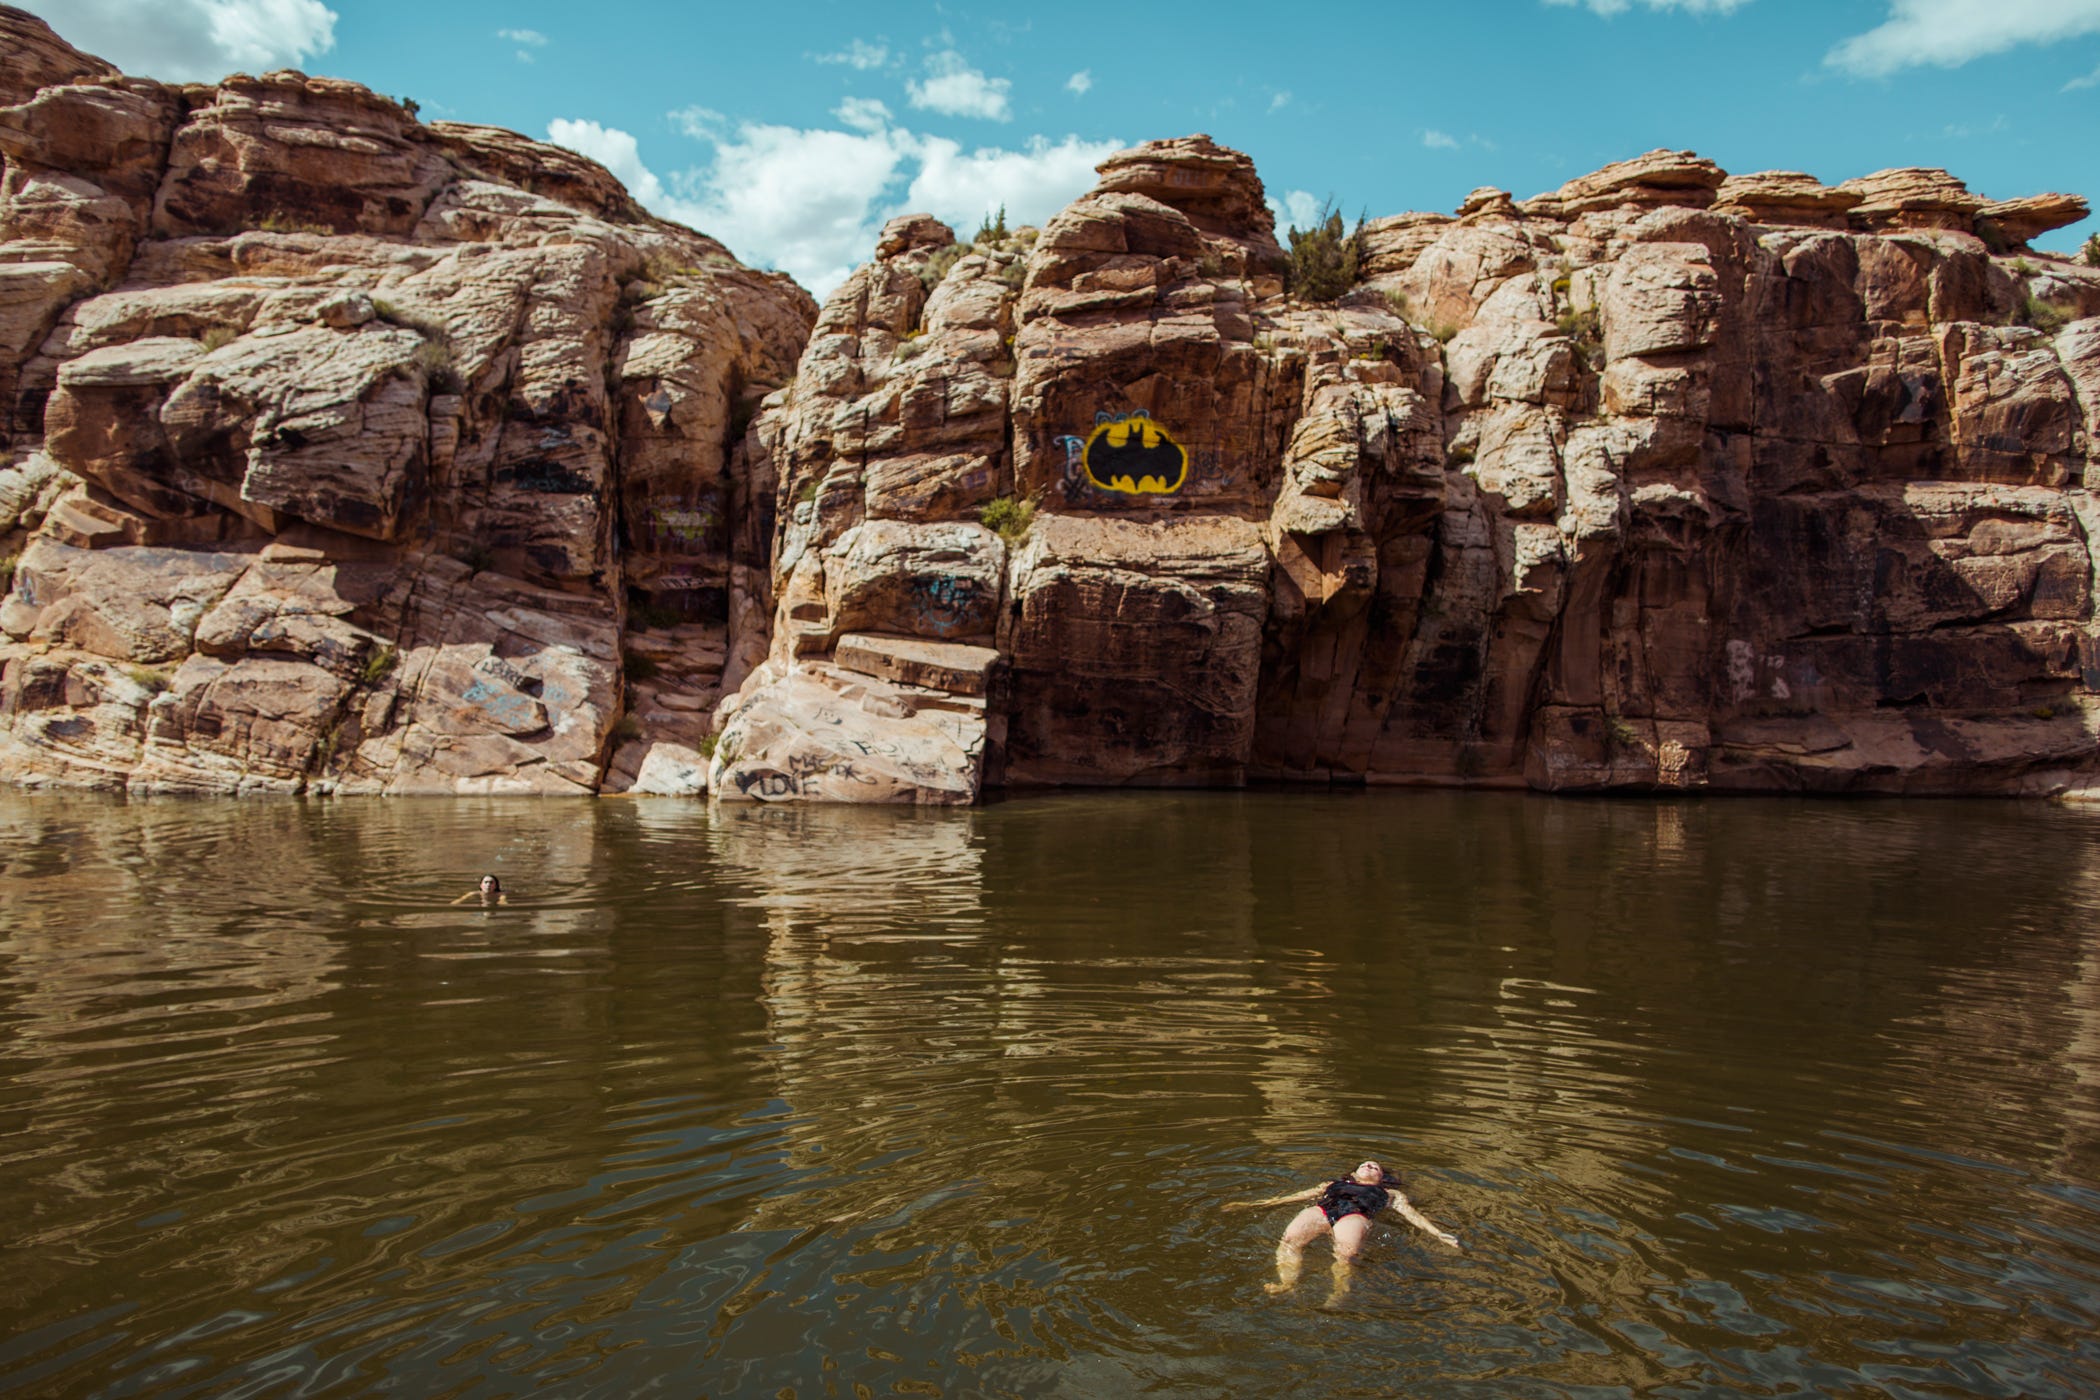 Why I Risk My Life Diving Into Swimming Holes Gone Medium